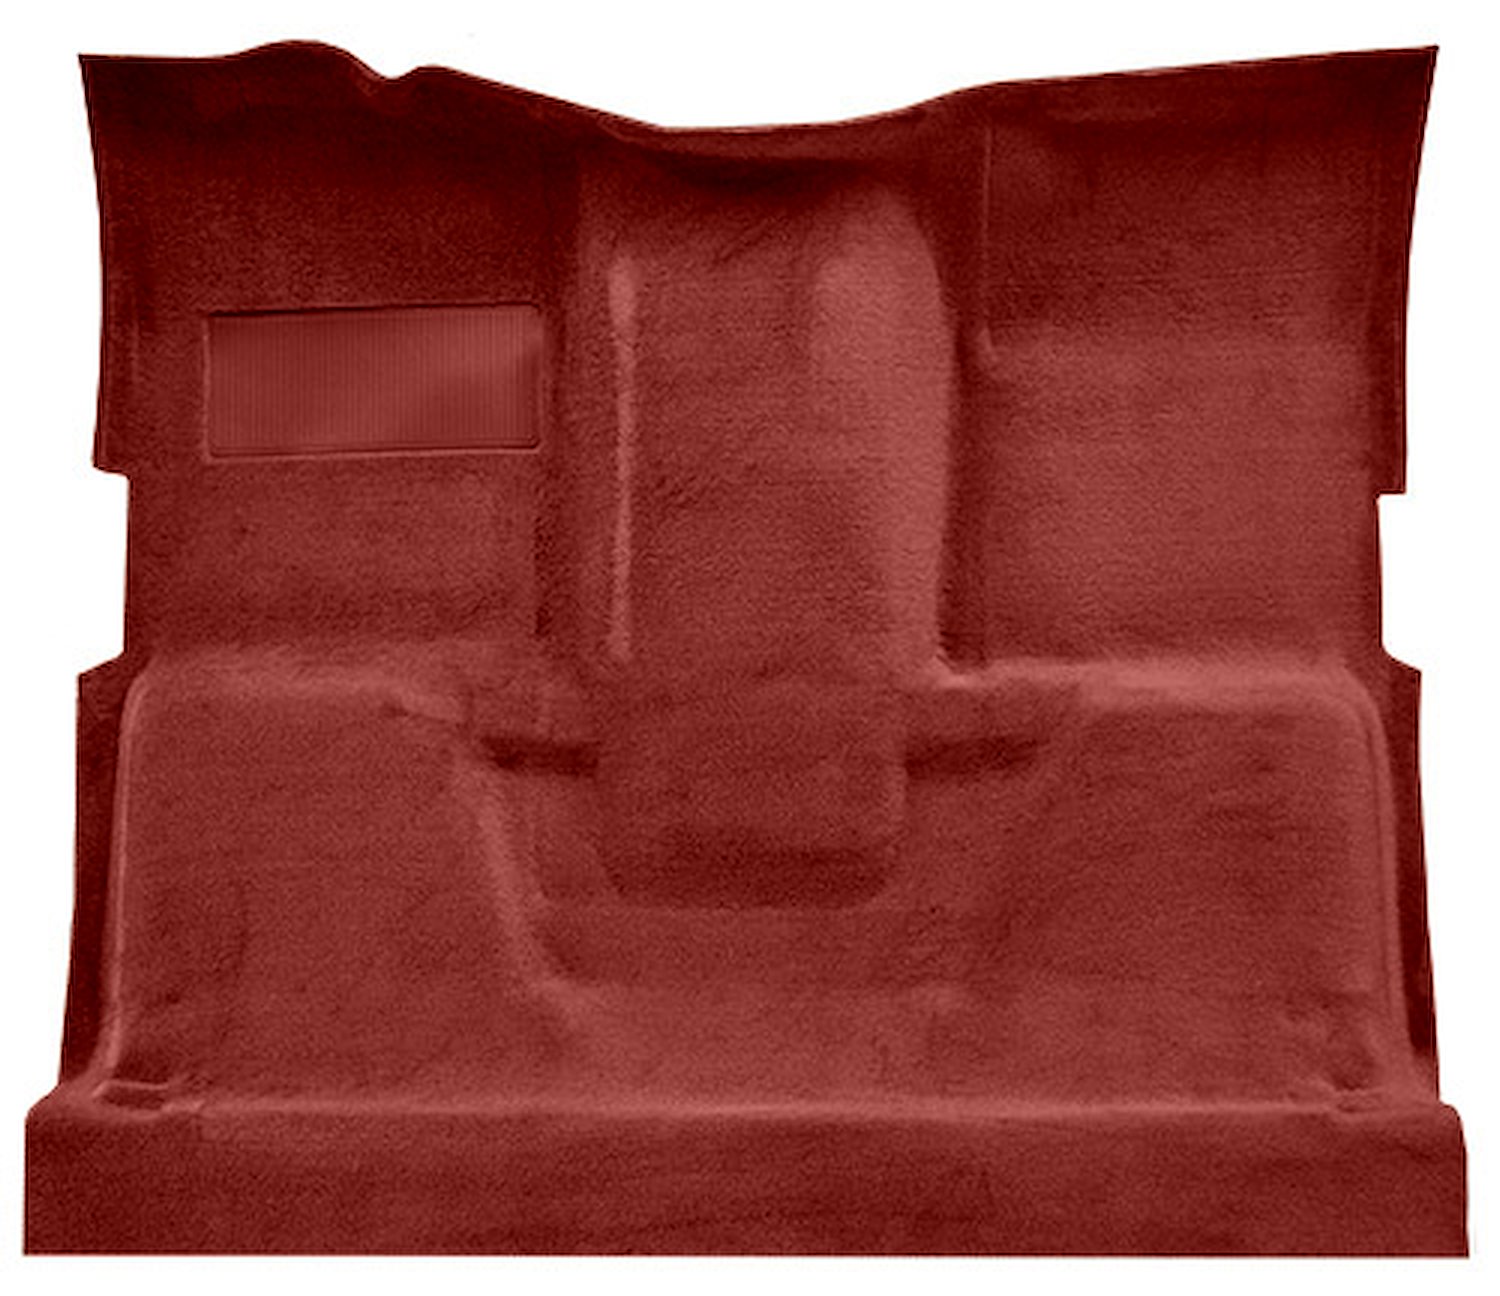 Molded Cut Pile Carpet for 1975-1980 Chevrolet/GMC K Series Truck [OE-Style Jute Backing, 1-Piece, Oxblood]